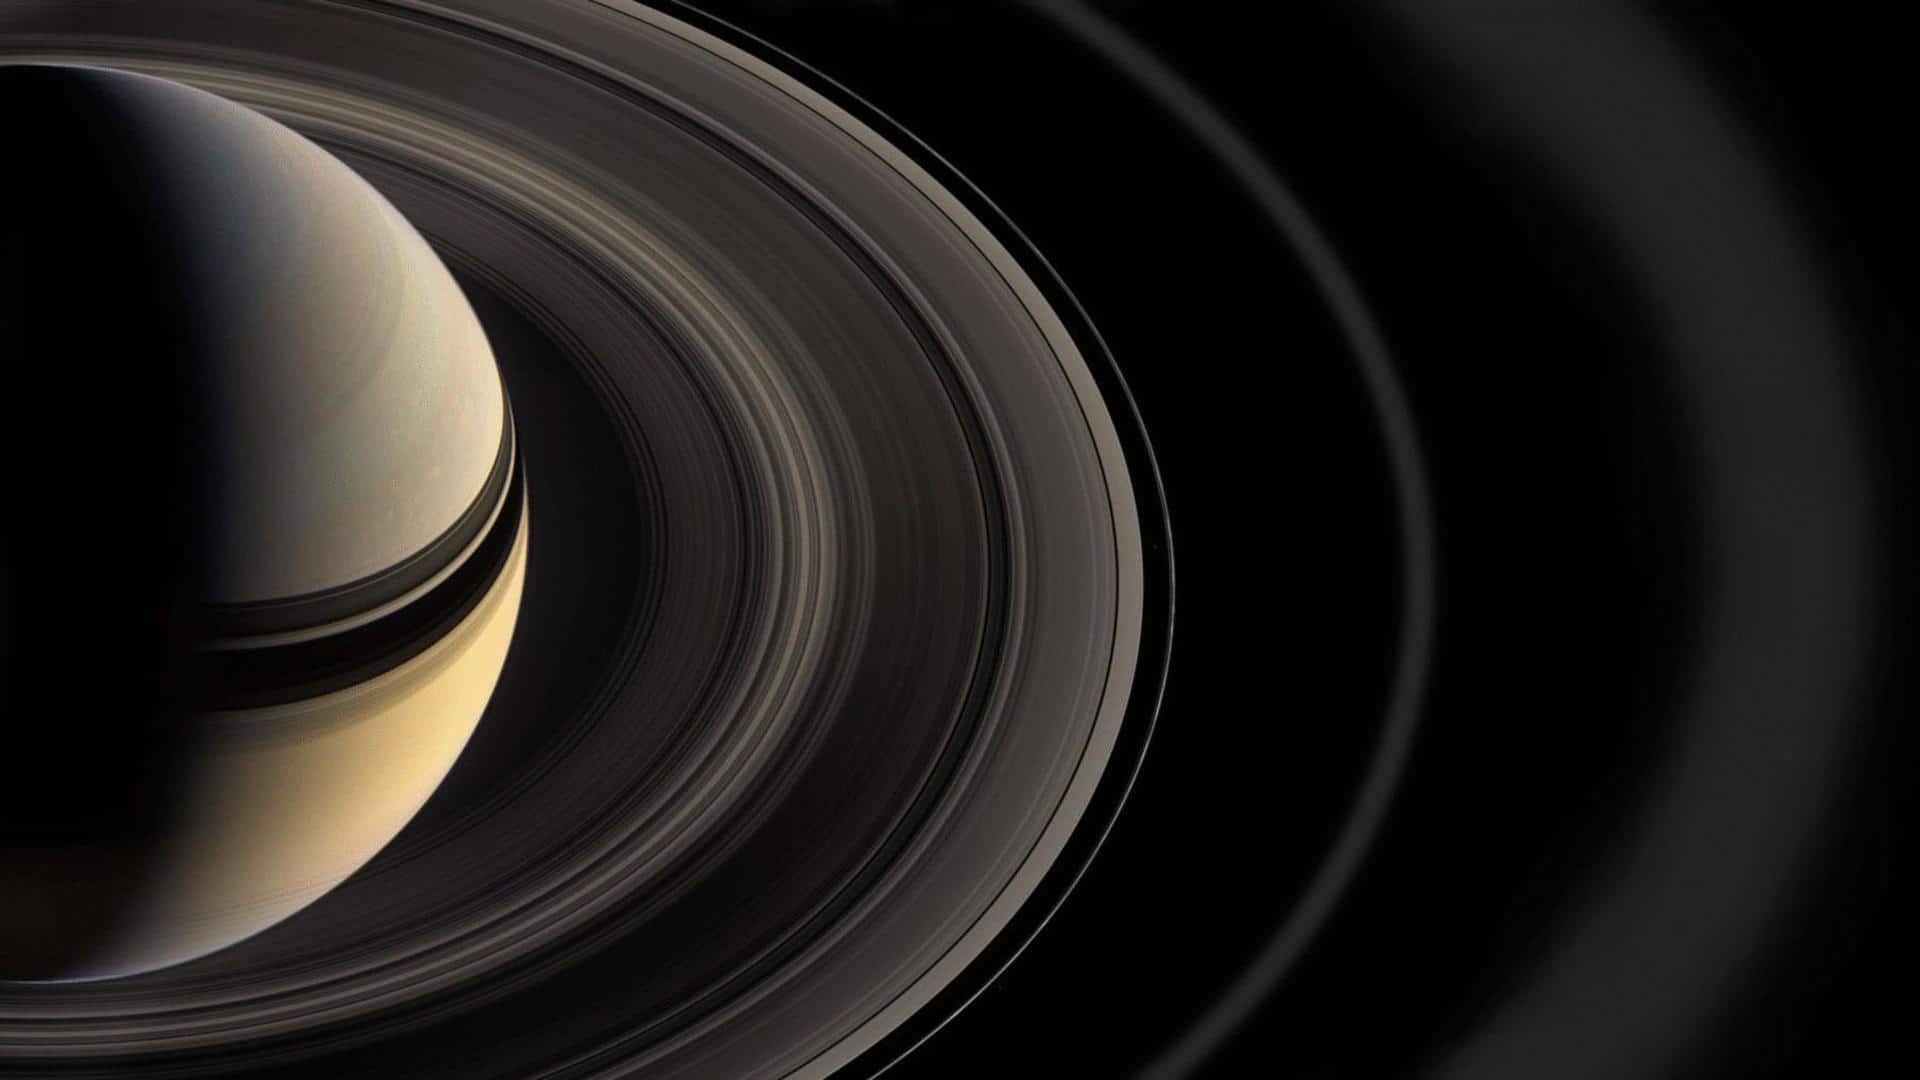 Saturn is losing its iconic rings but why